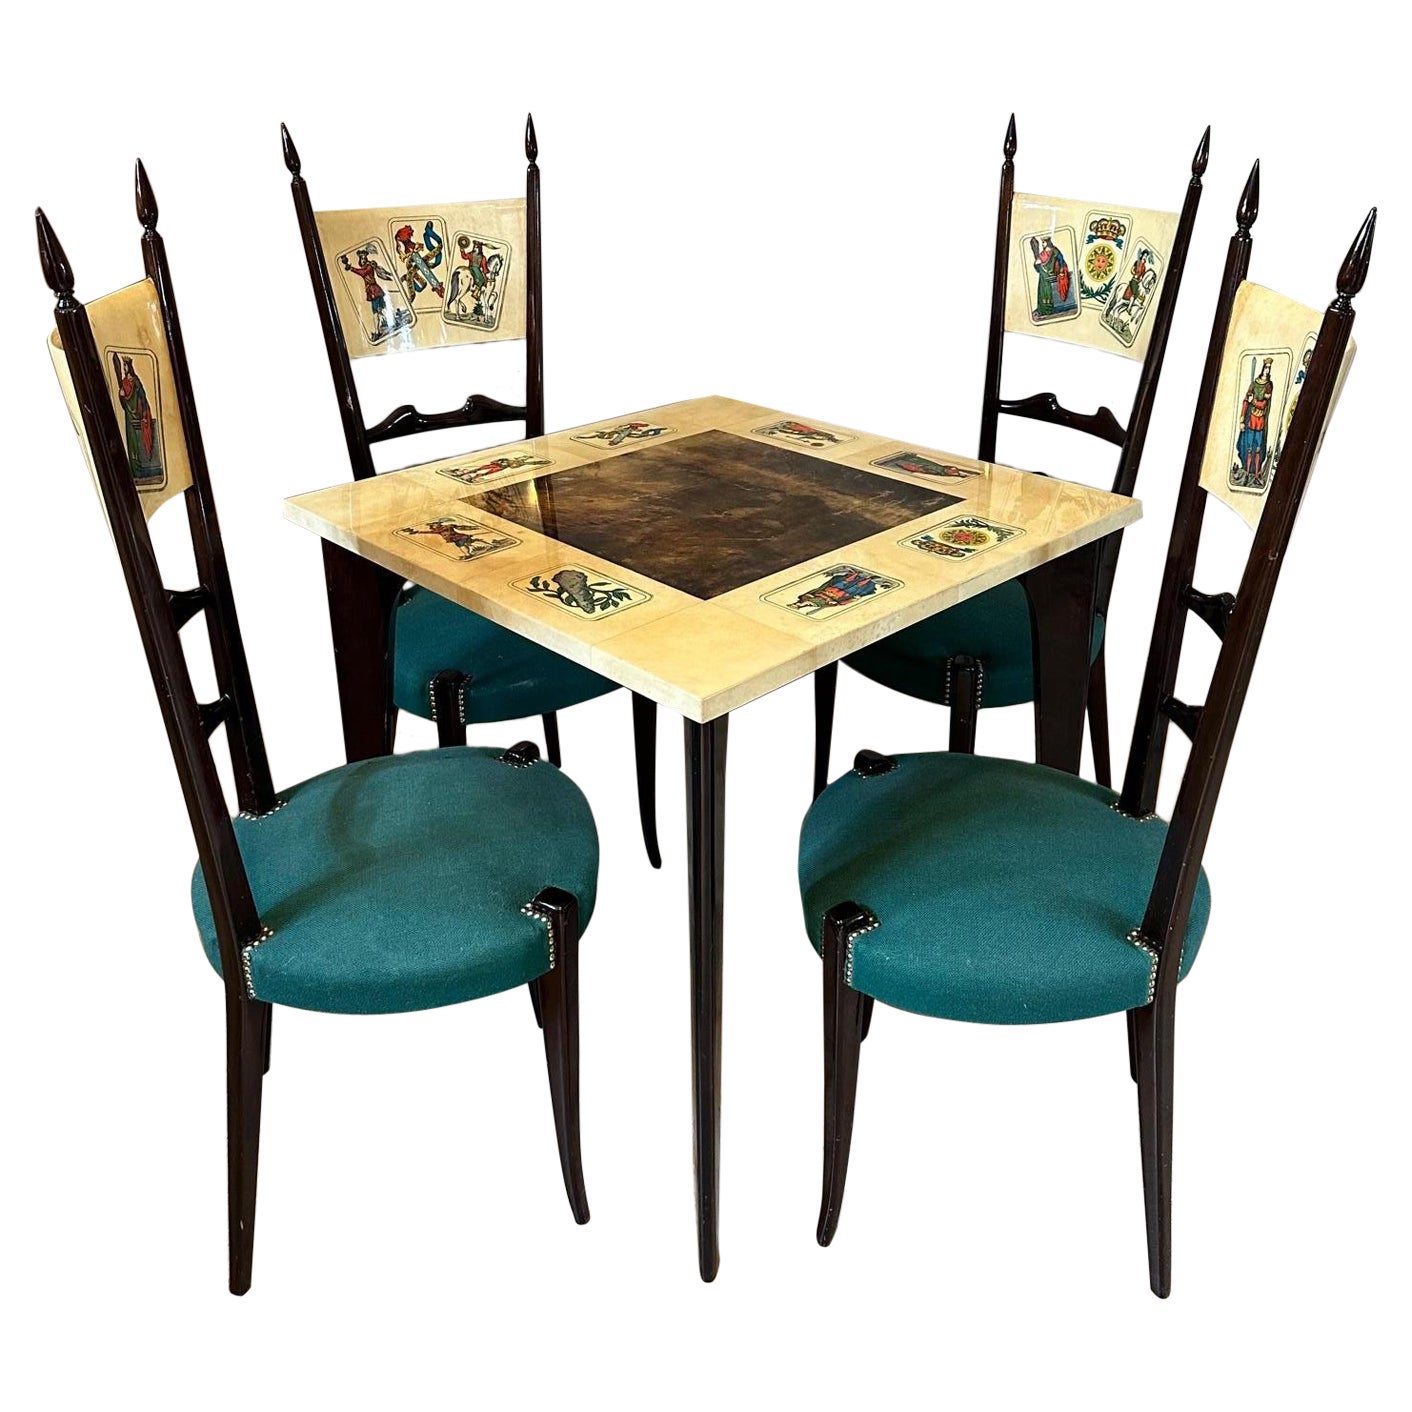 20th century Aldo Tura Lacquered Goatskin and Walnut Table With Chairs, 1960s For Sale